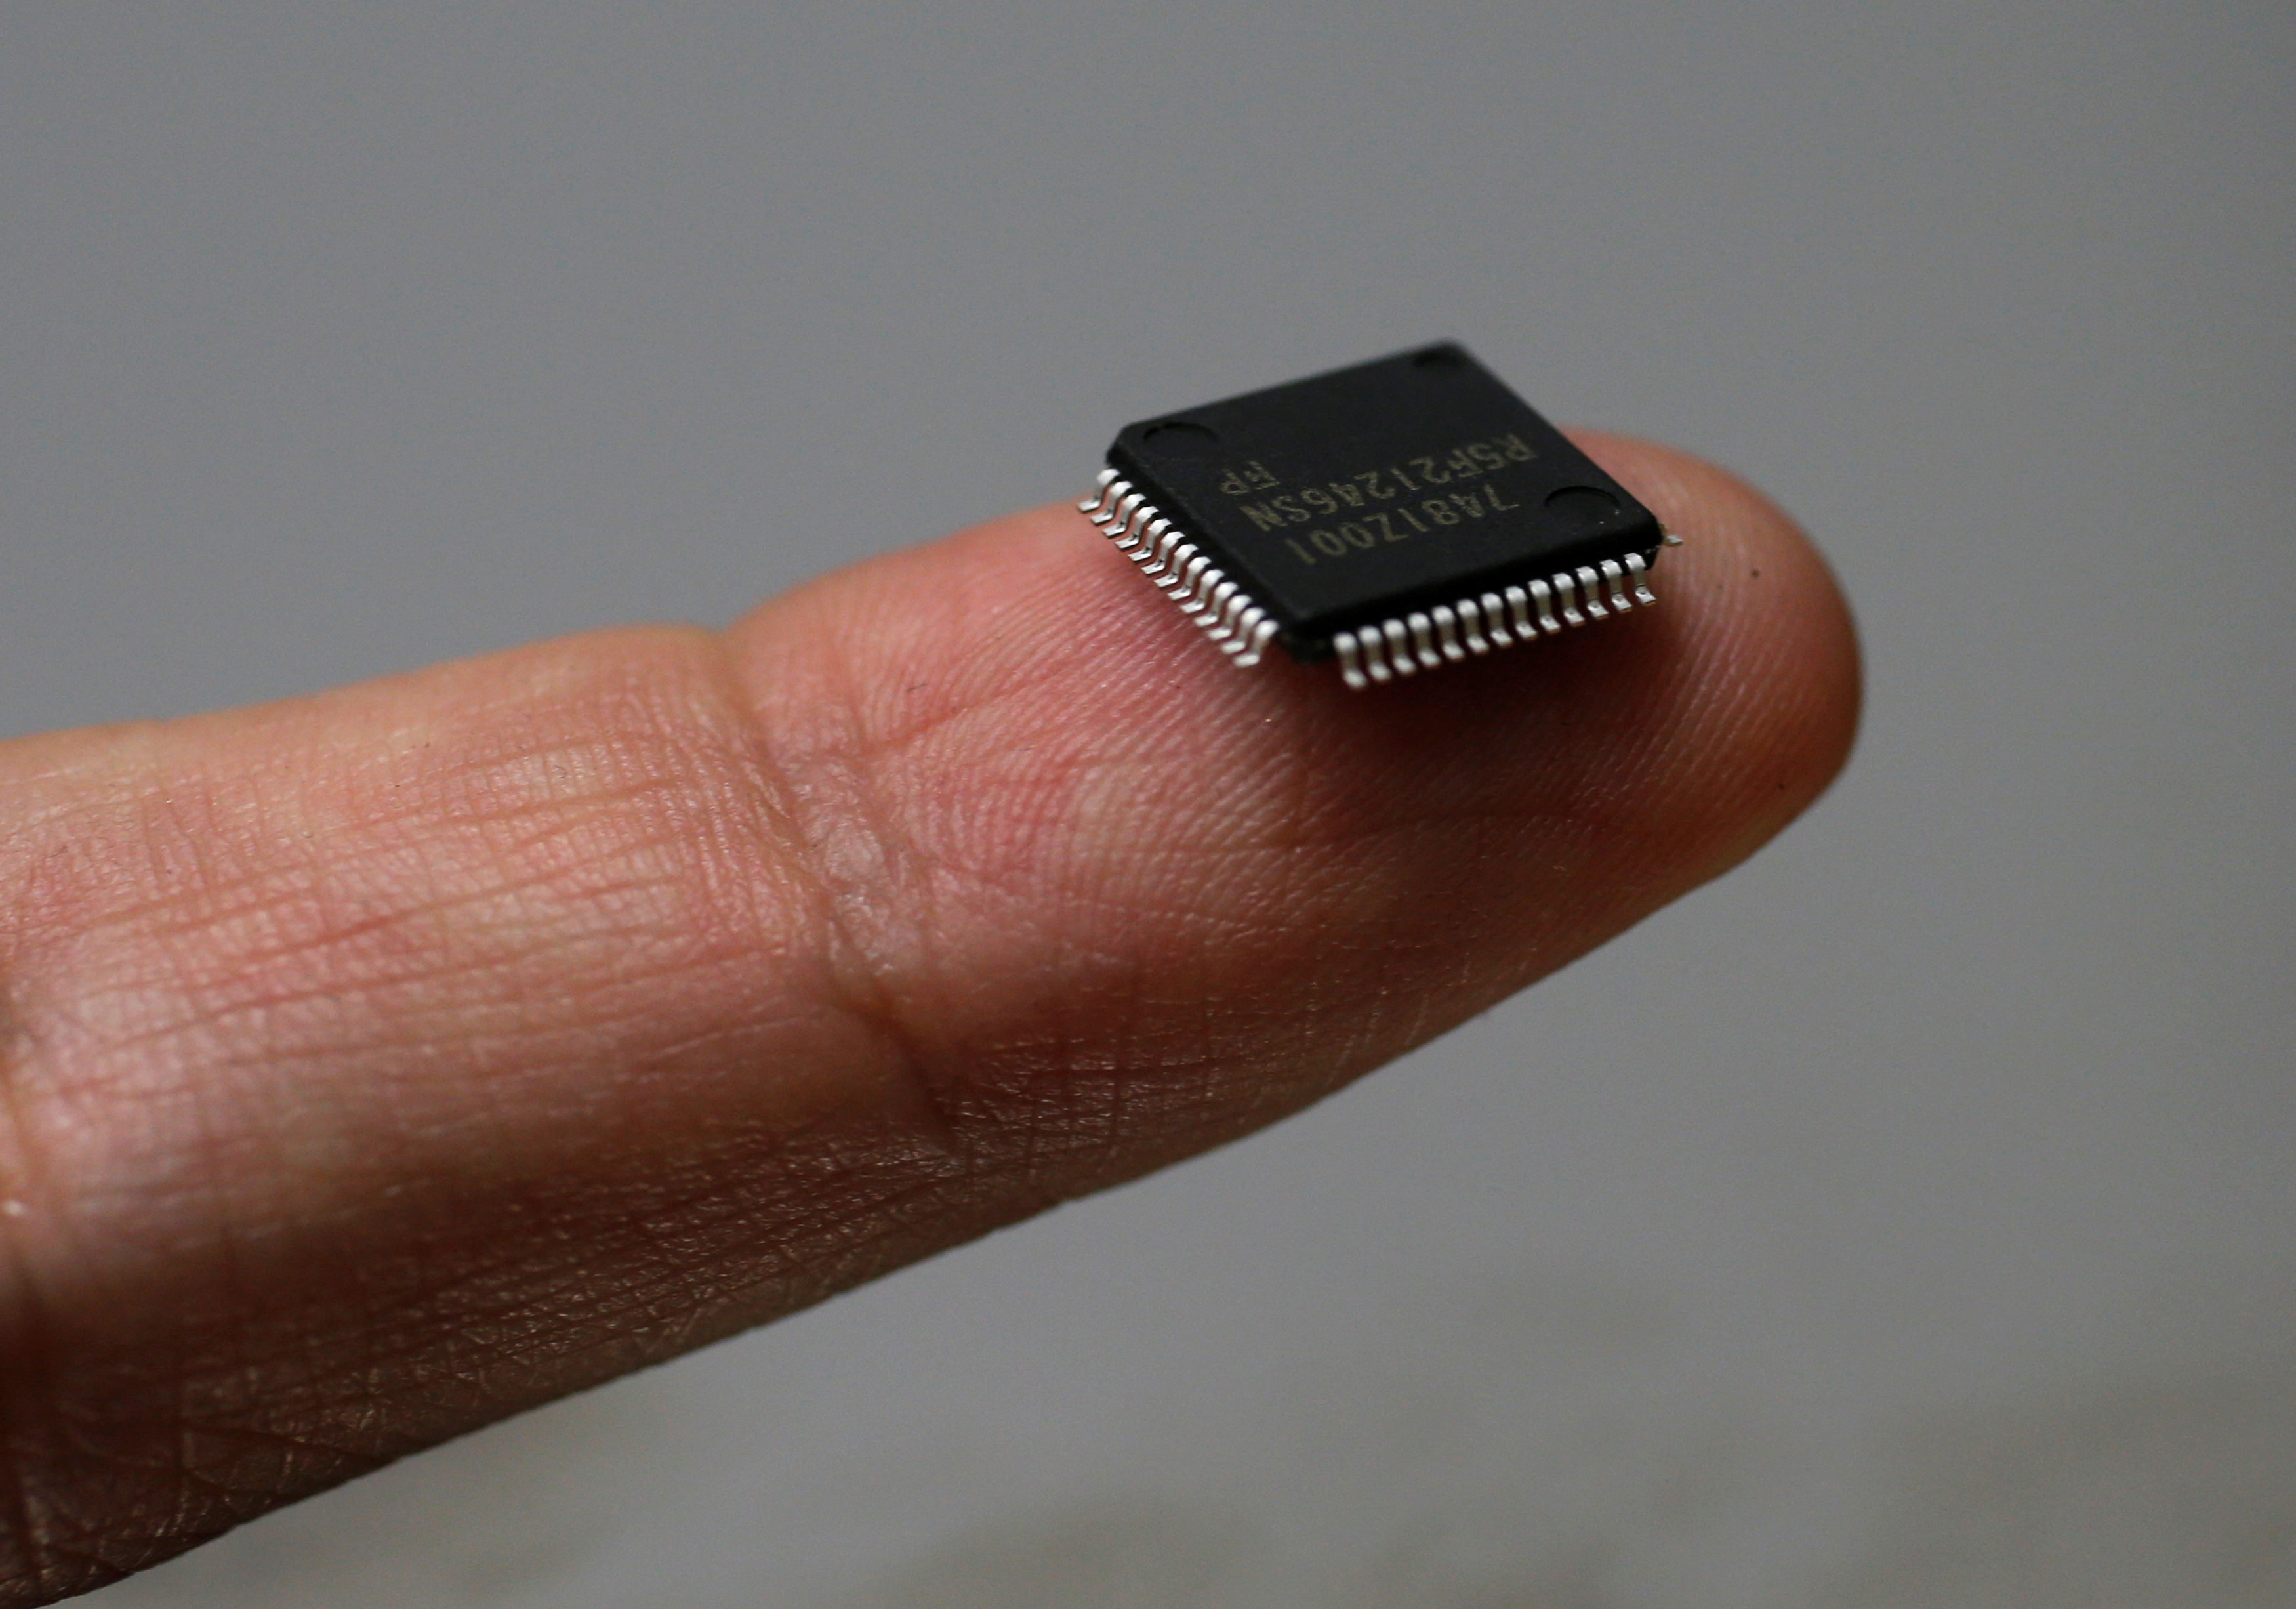 A Renesas Electronics Corp microcontroller chip sits on a finger in this illustrative photograph